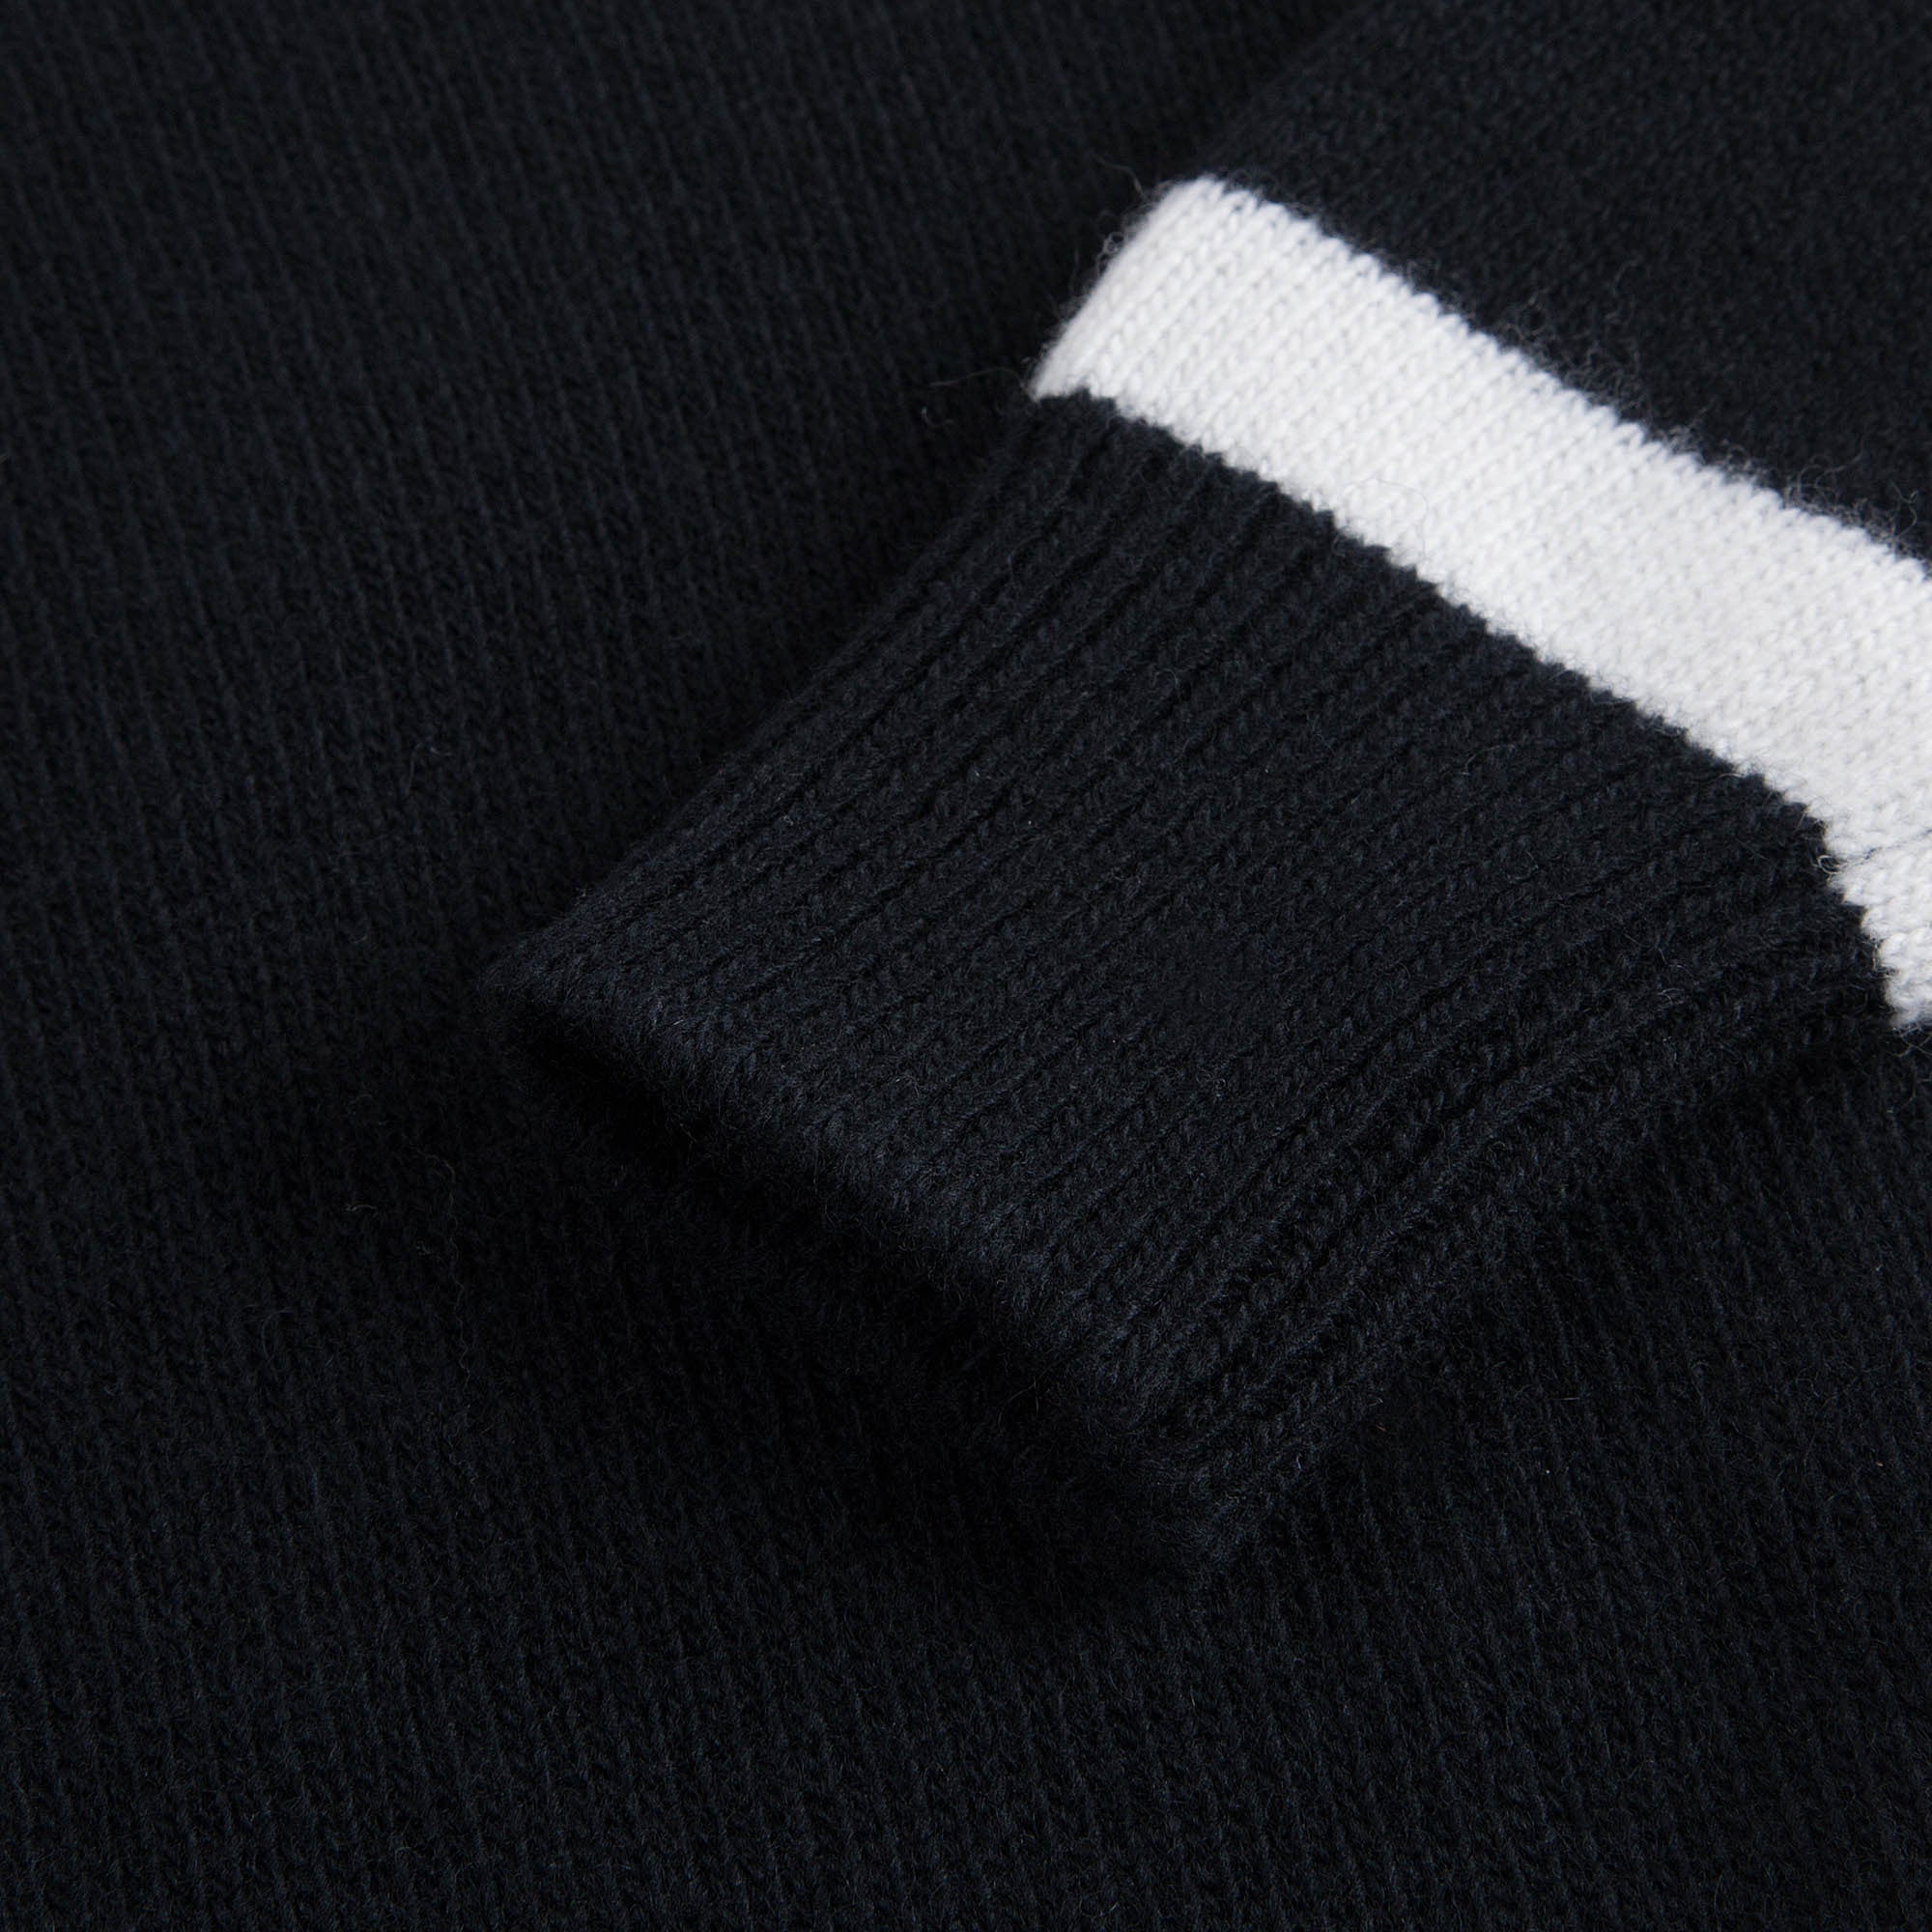 Girls Navy Blue Wool Knitted Sweater